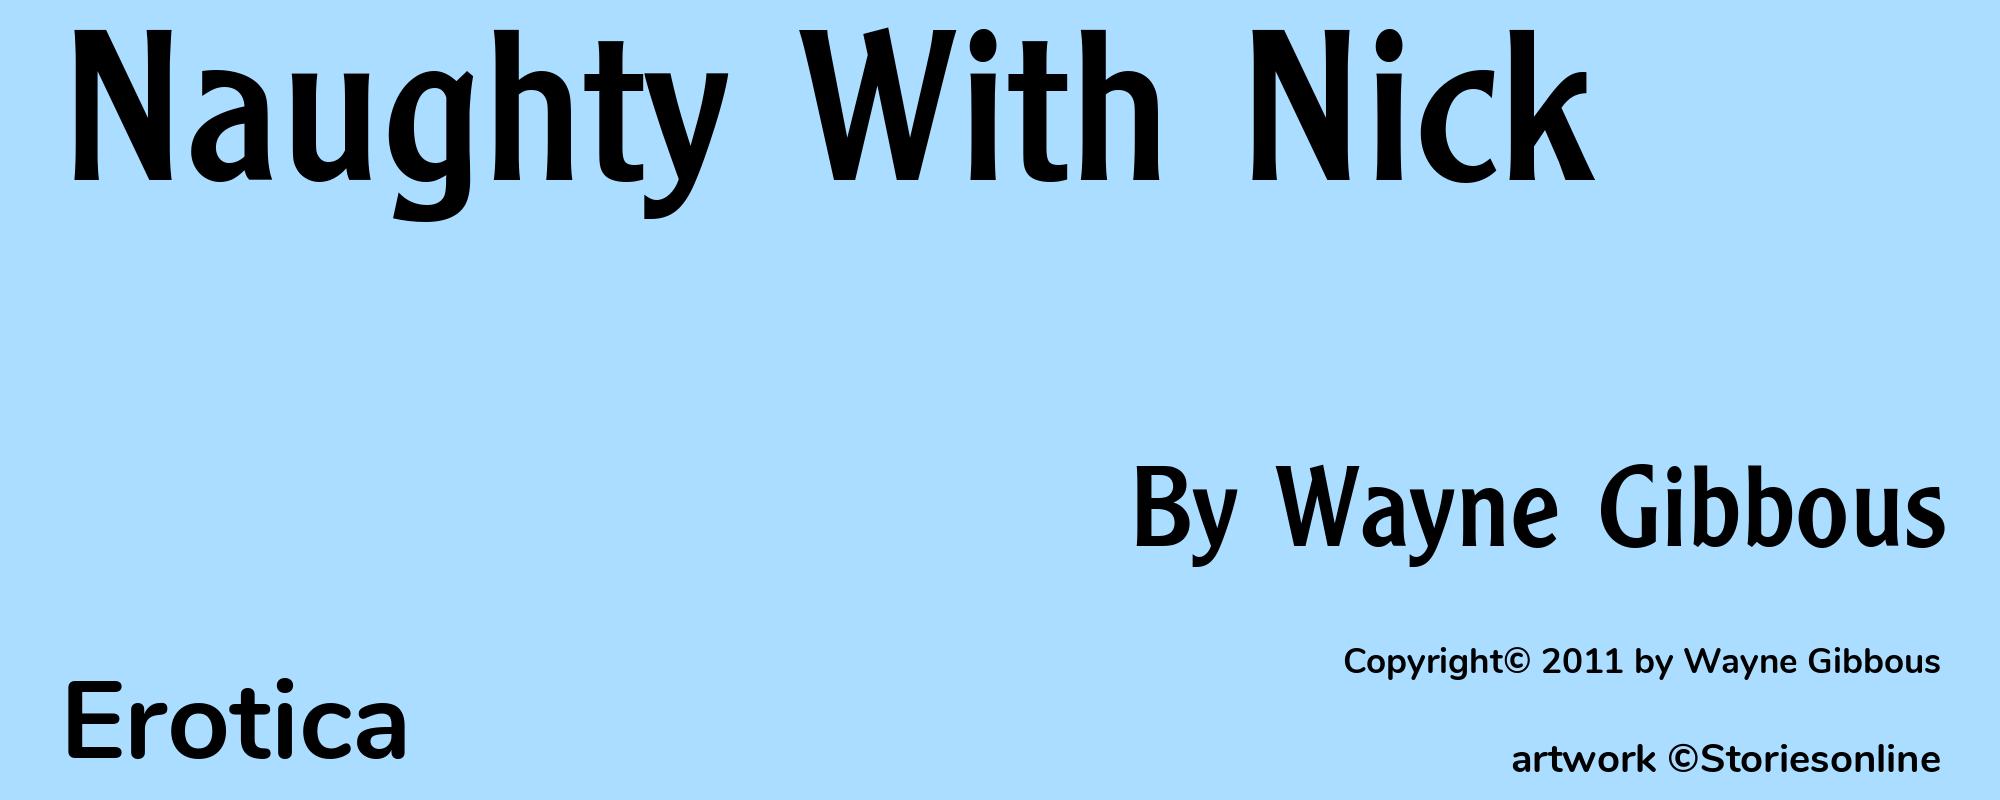 Naughty With Nick - Cover